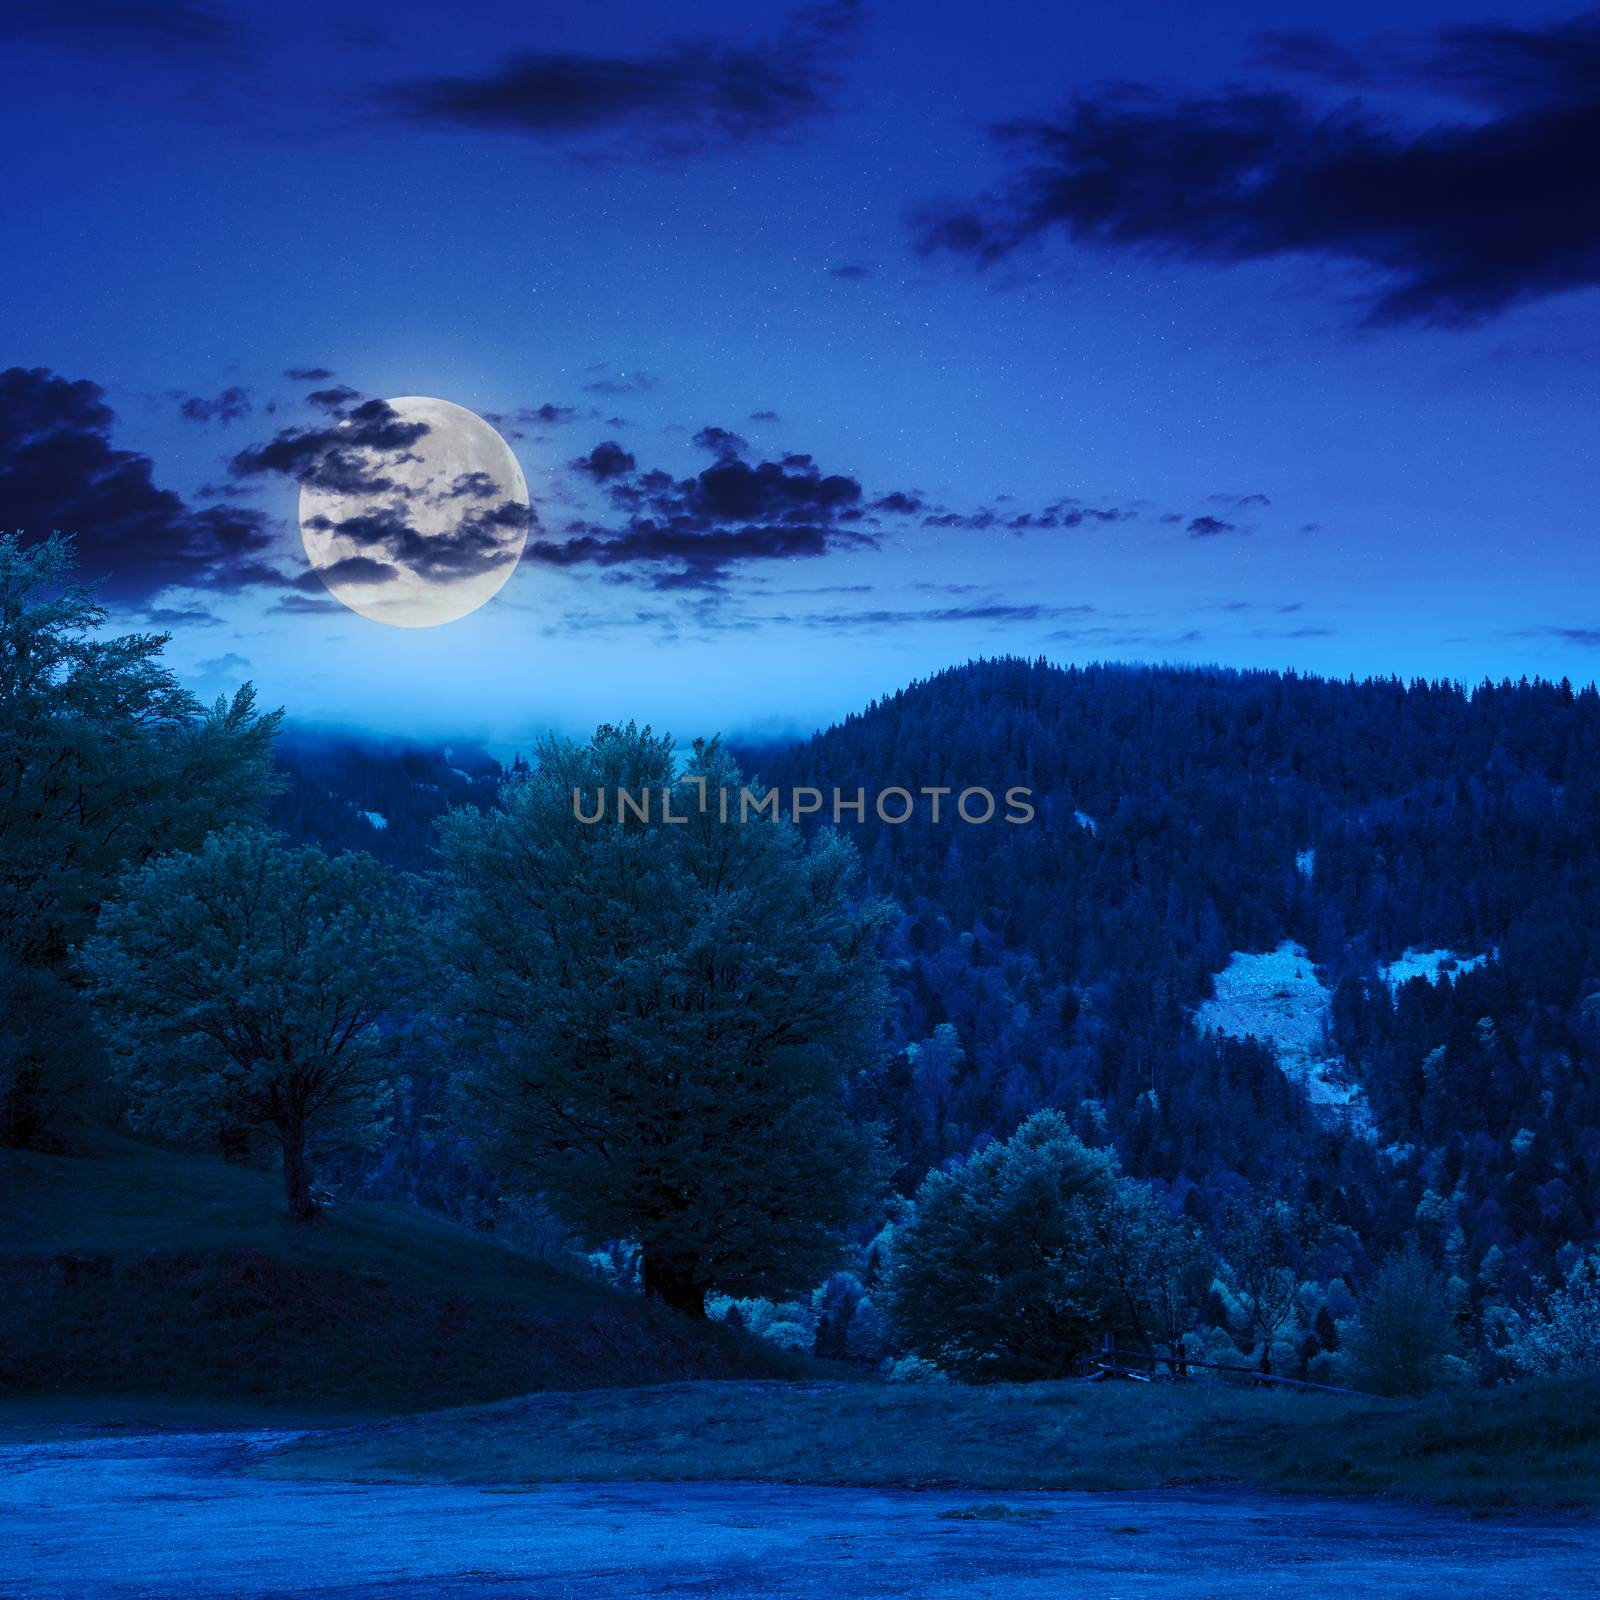 summer landscape. fence near the meadow path on the hillside with forest on the mountain at night in moon light